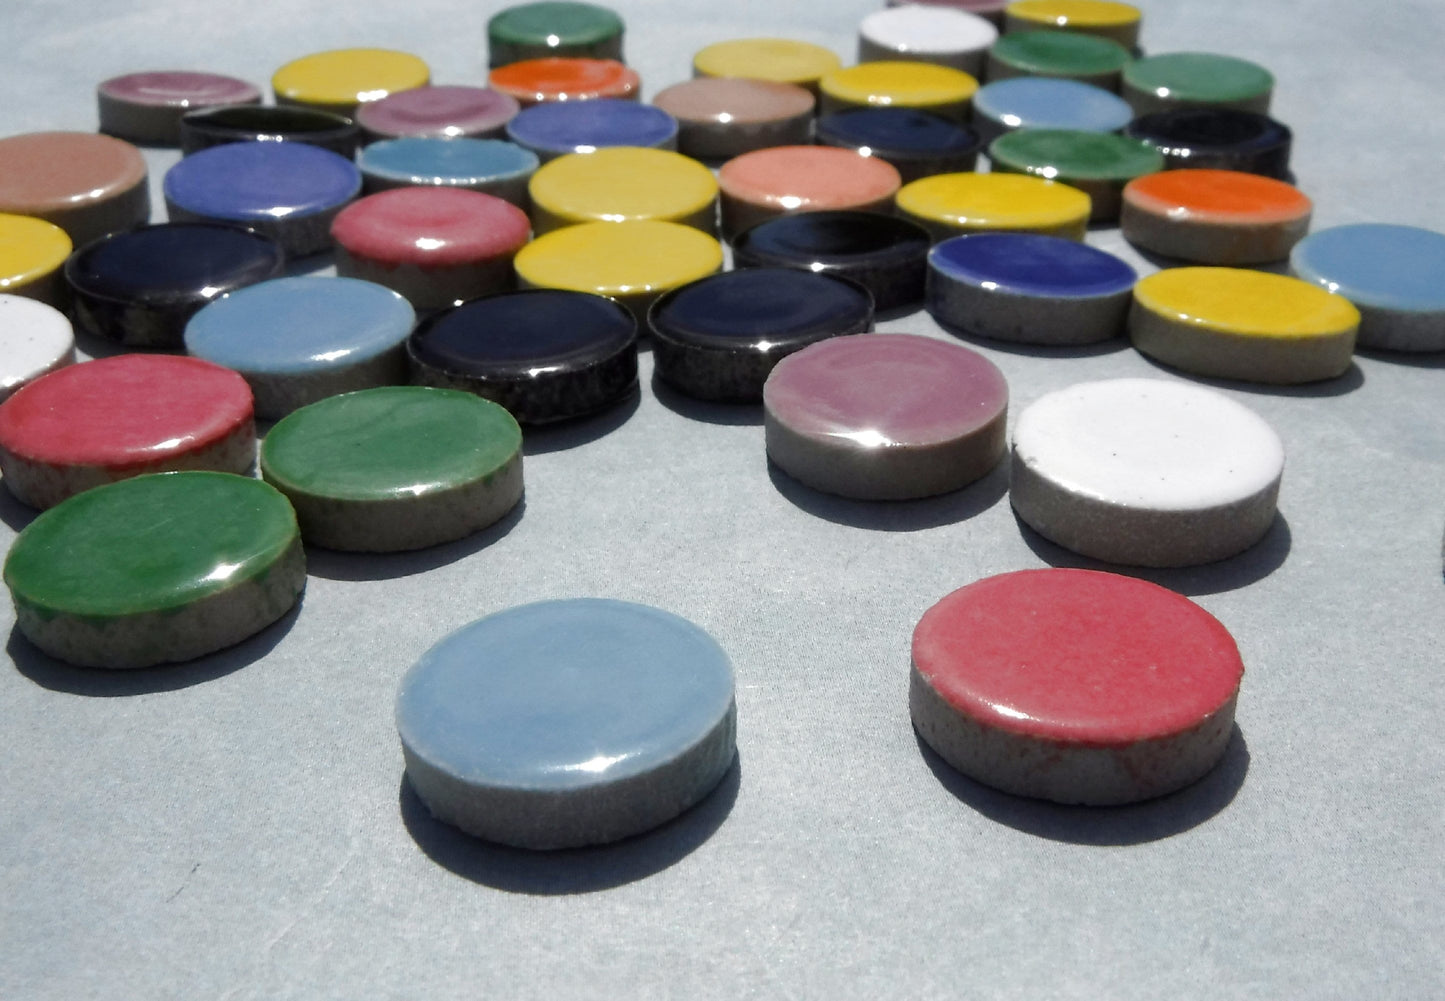 Circle Mosaic Tiles - 50 Ceramic 3/4" Inch Tiles in Assorted Colors